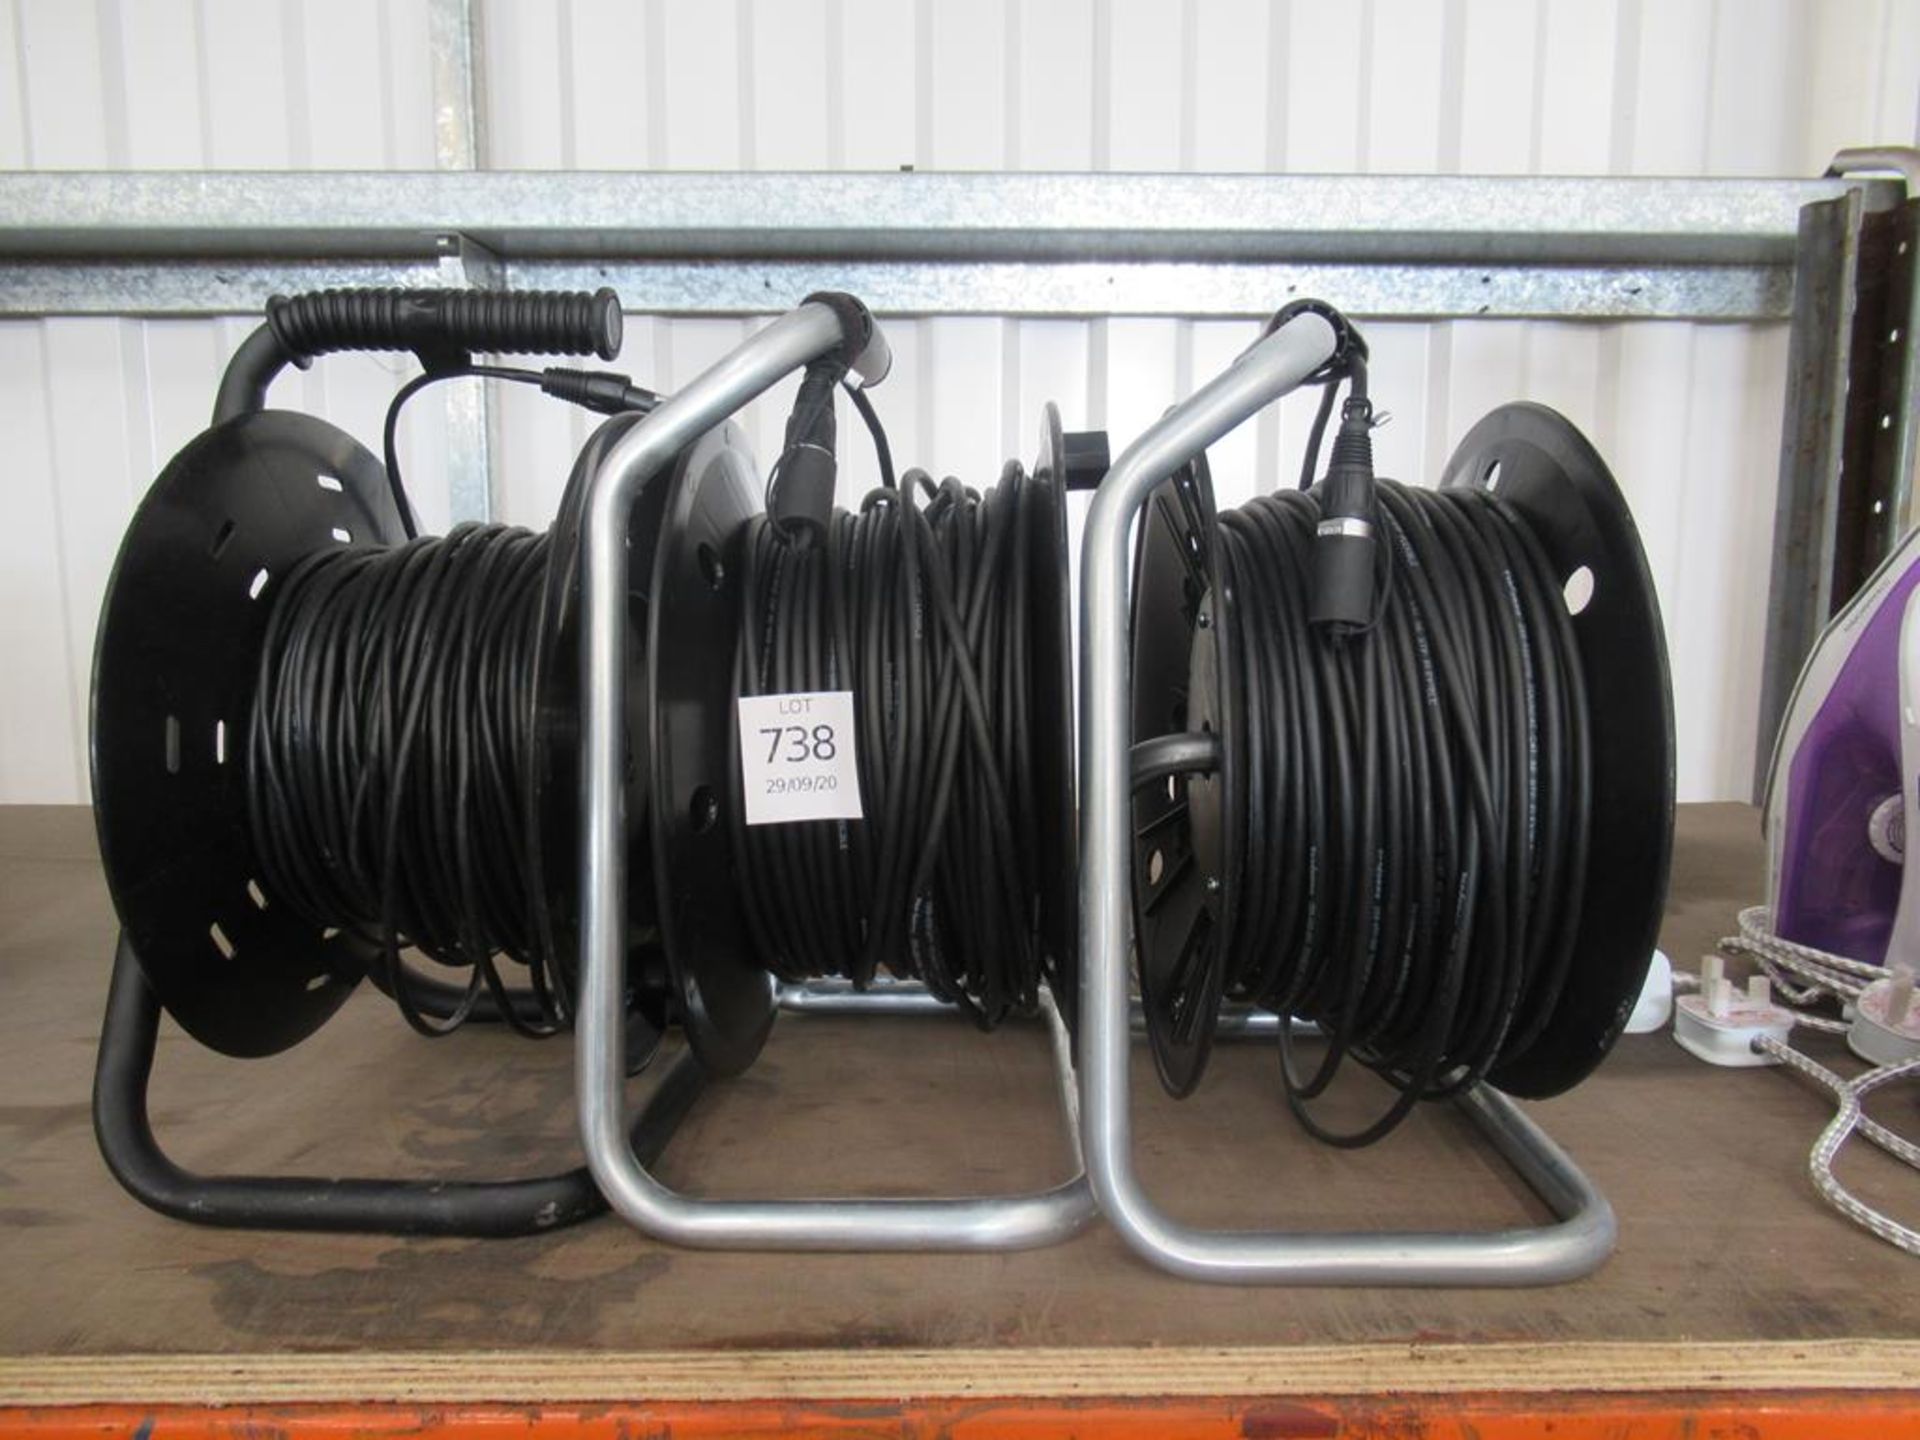 3 x reels of extension cables